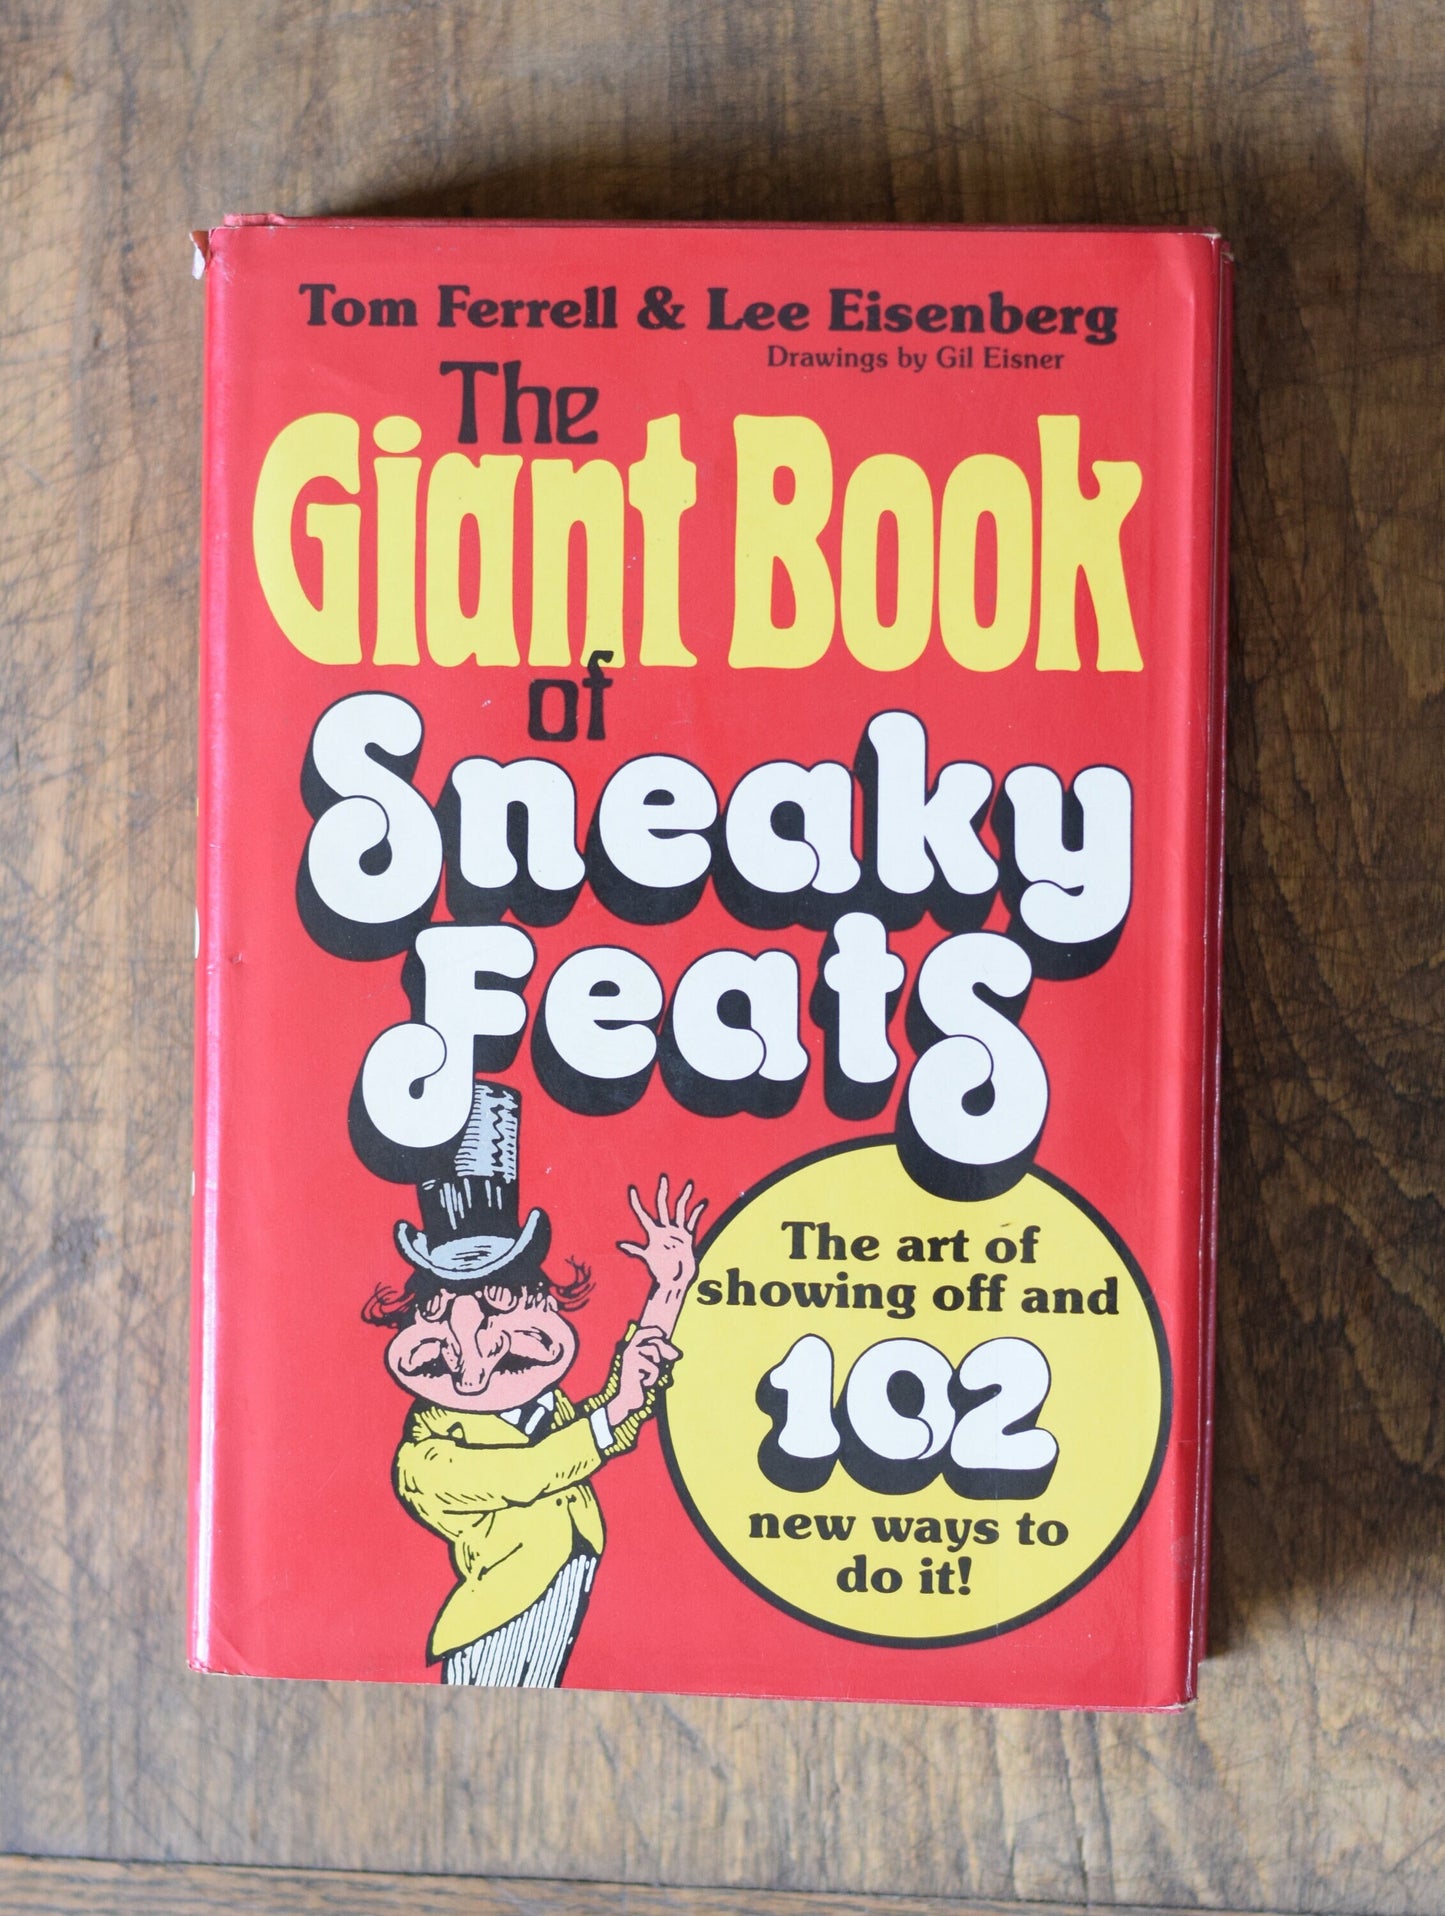 Vintage Non-Fiction Hardback: Tom Ferrell and Lee Eisenberg - The Giant Book of Sneaky Feats